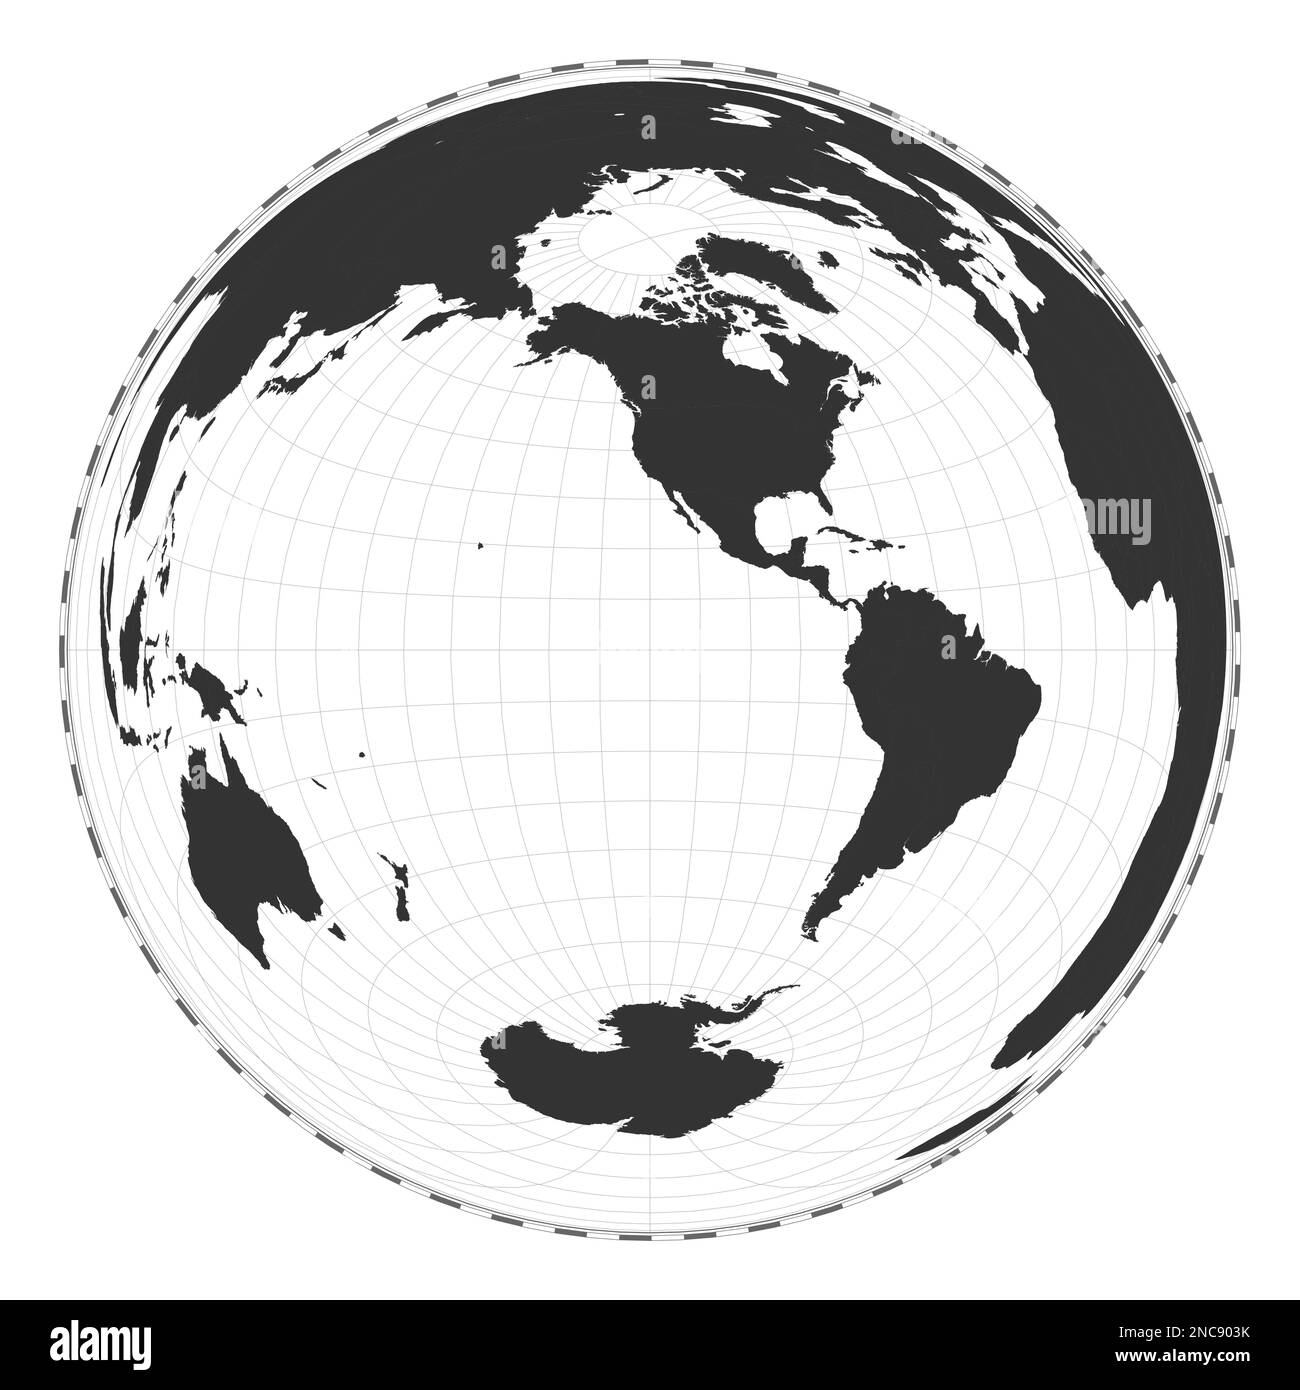 Vector world map. Lambert azimuthal equal-area projection. Plain world geographical map with latitude and longitude lines. Centered to 120deg E longit Stock Vector